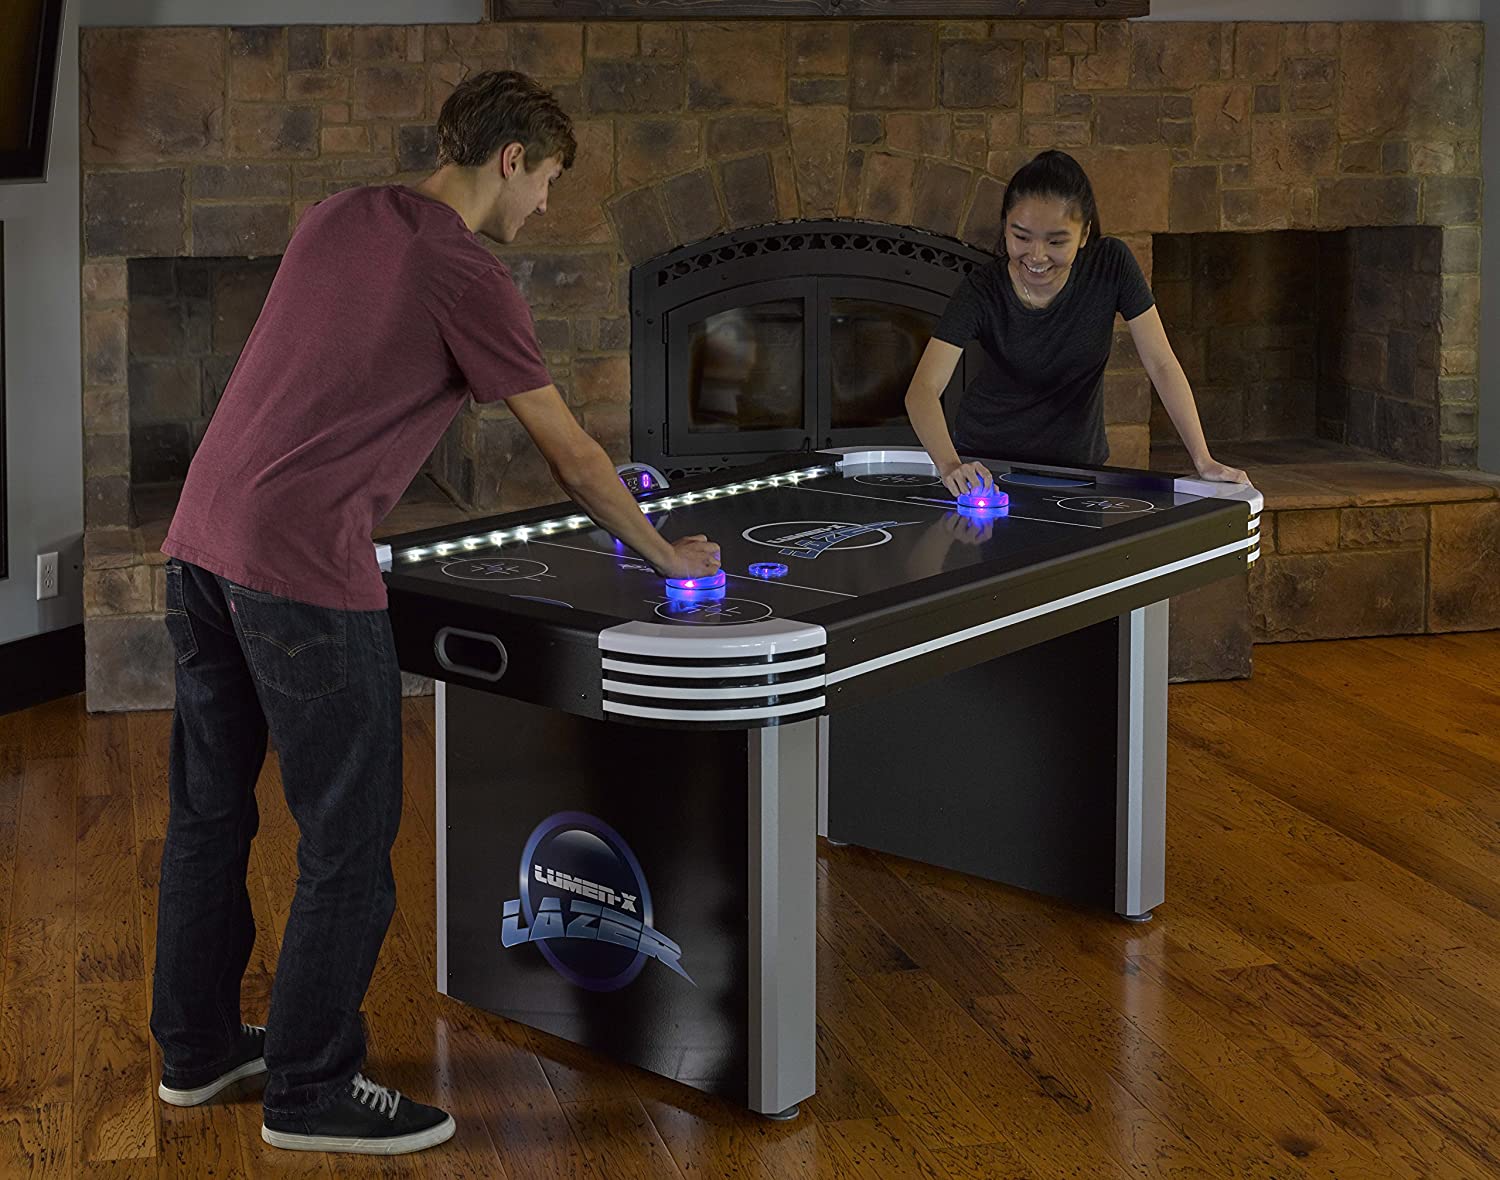 Manufacturers Of Triumph Air Hockey Tables Offer Exceptional Air Hockey Table Specifications